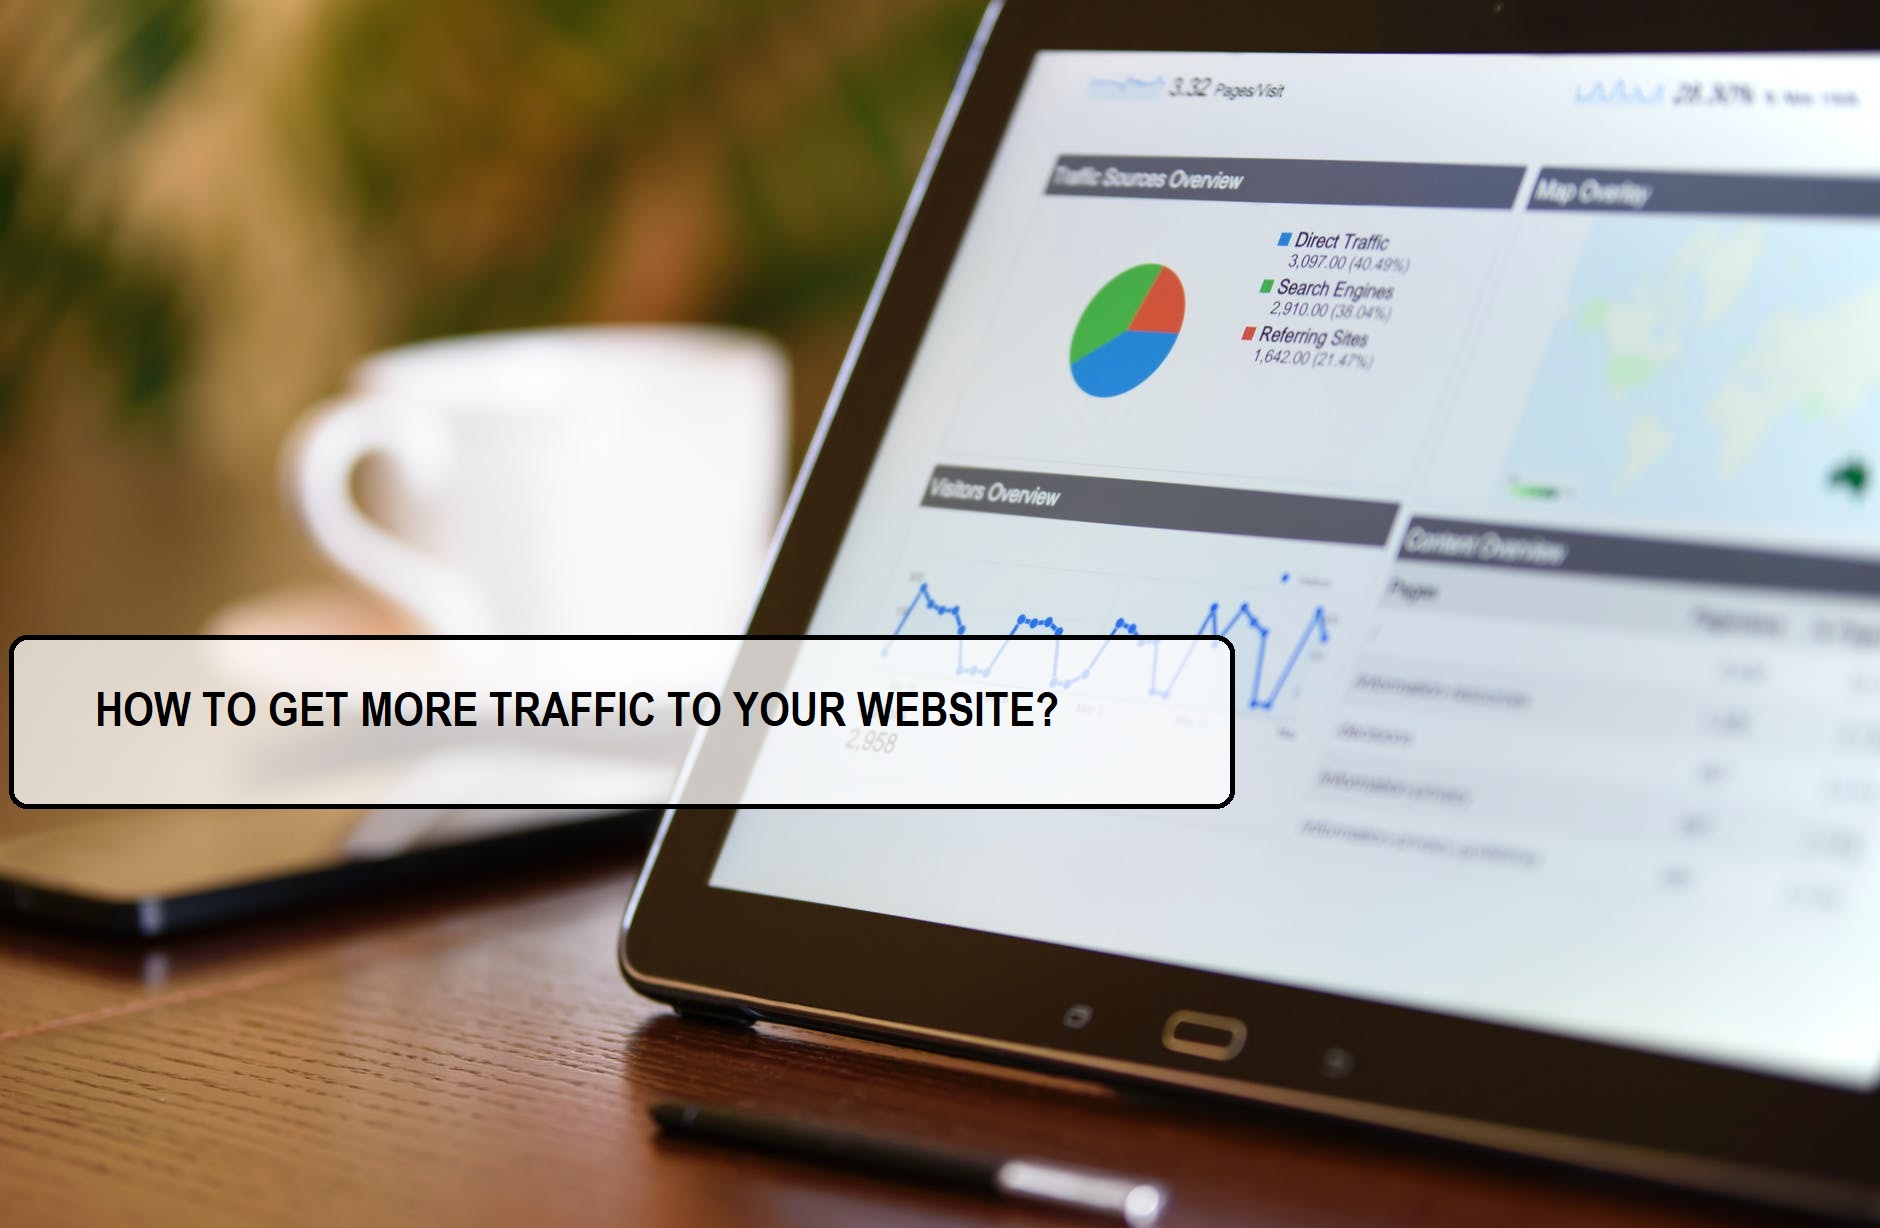 HOW TO GET MORE TRAFFIC TO YOUR WEBSITE?